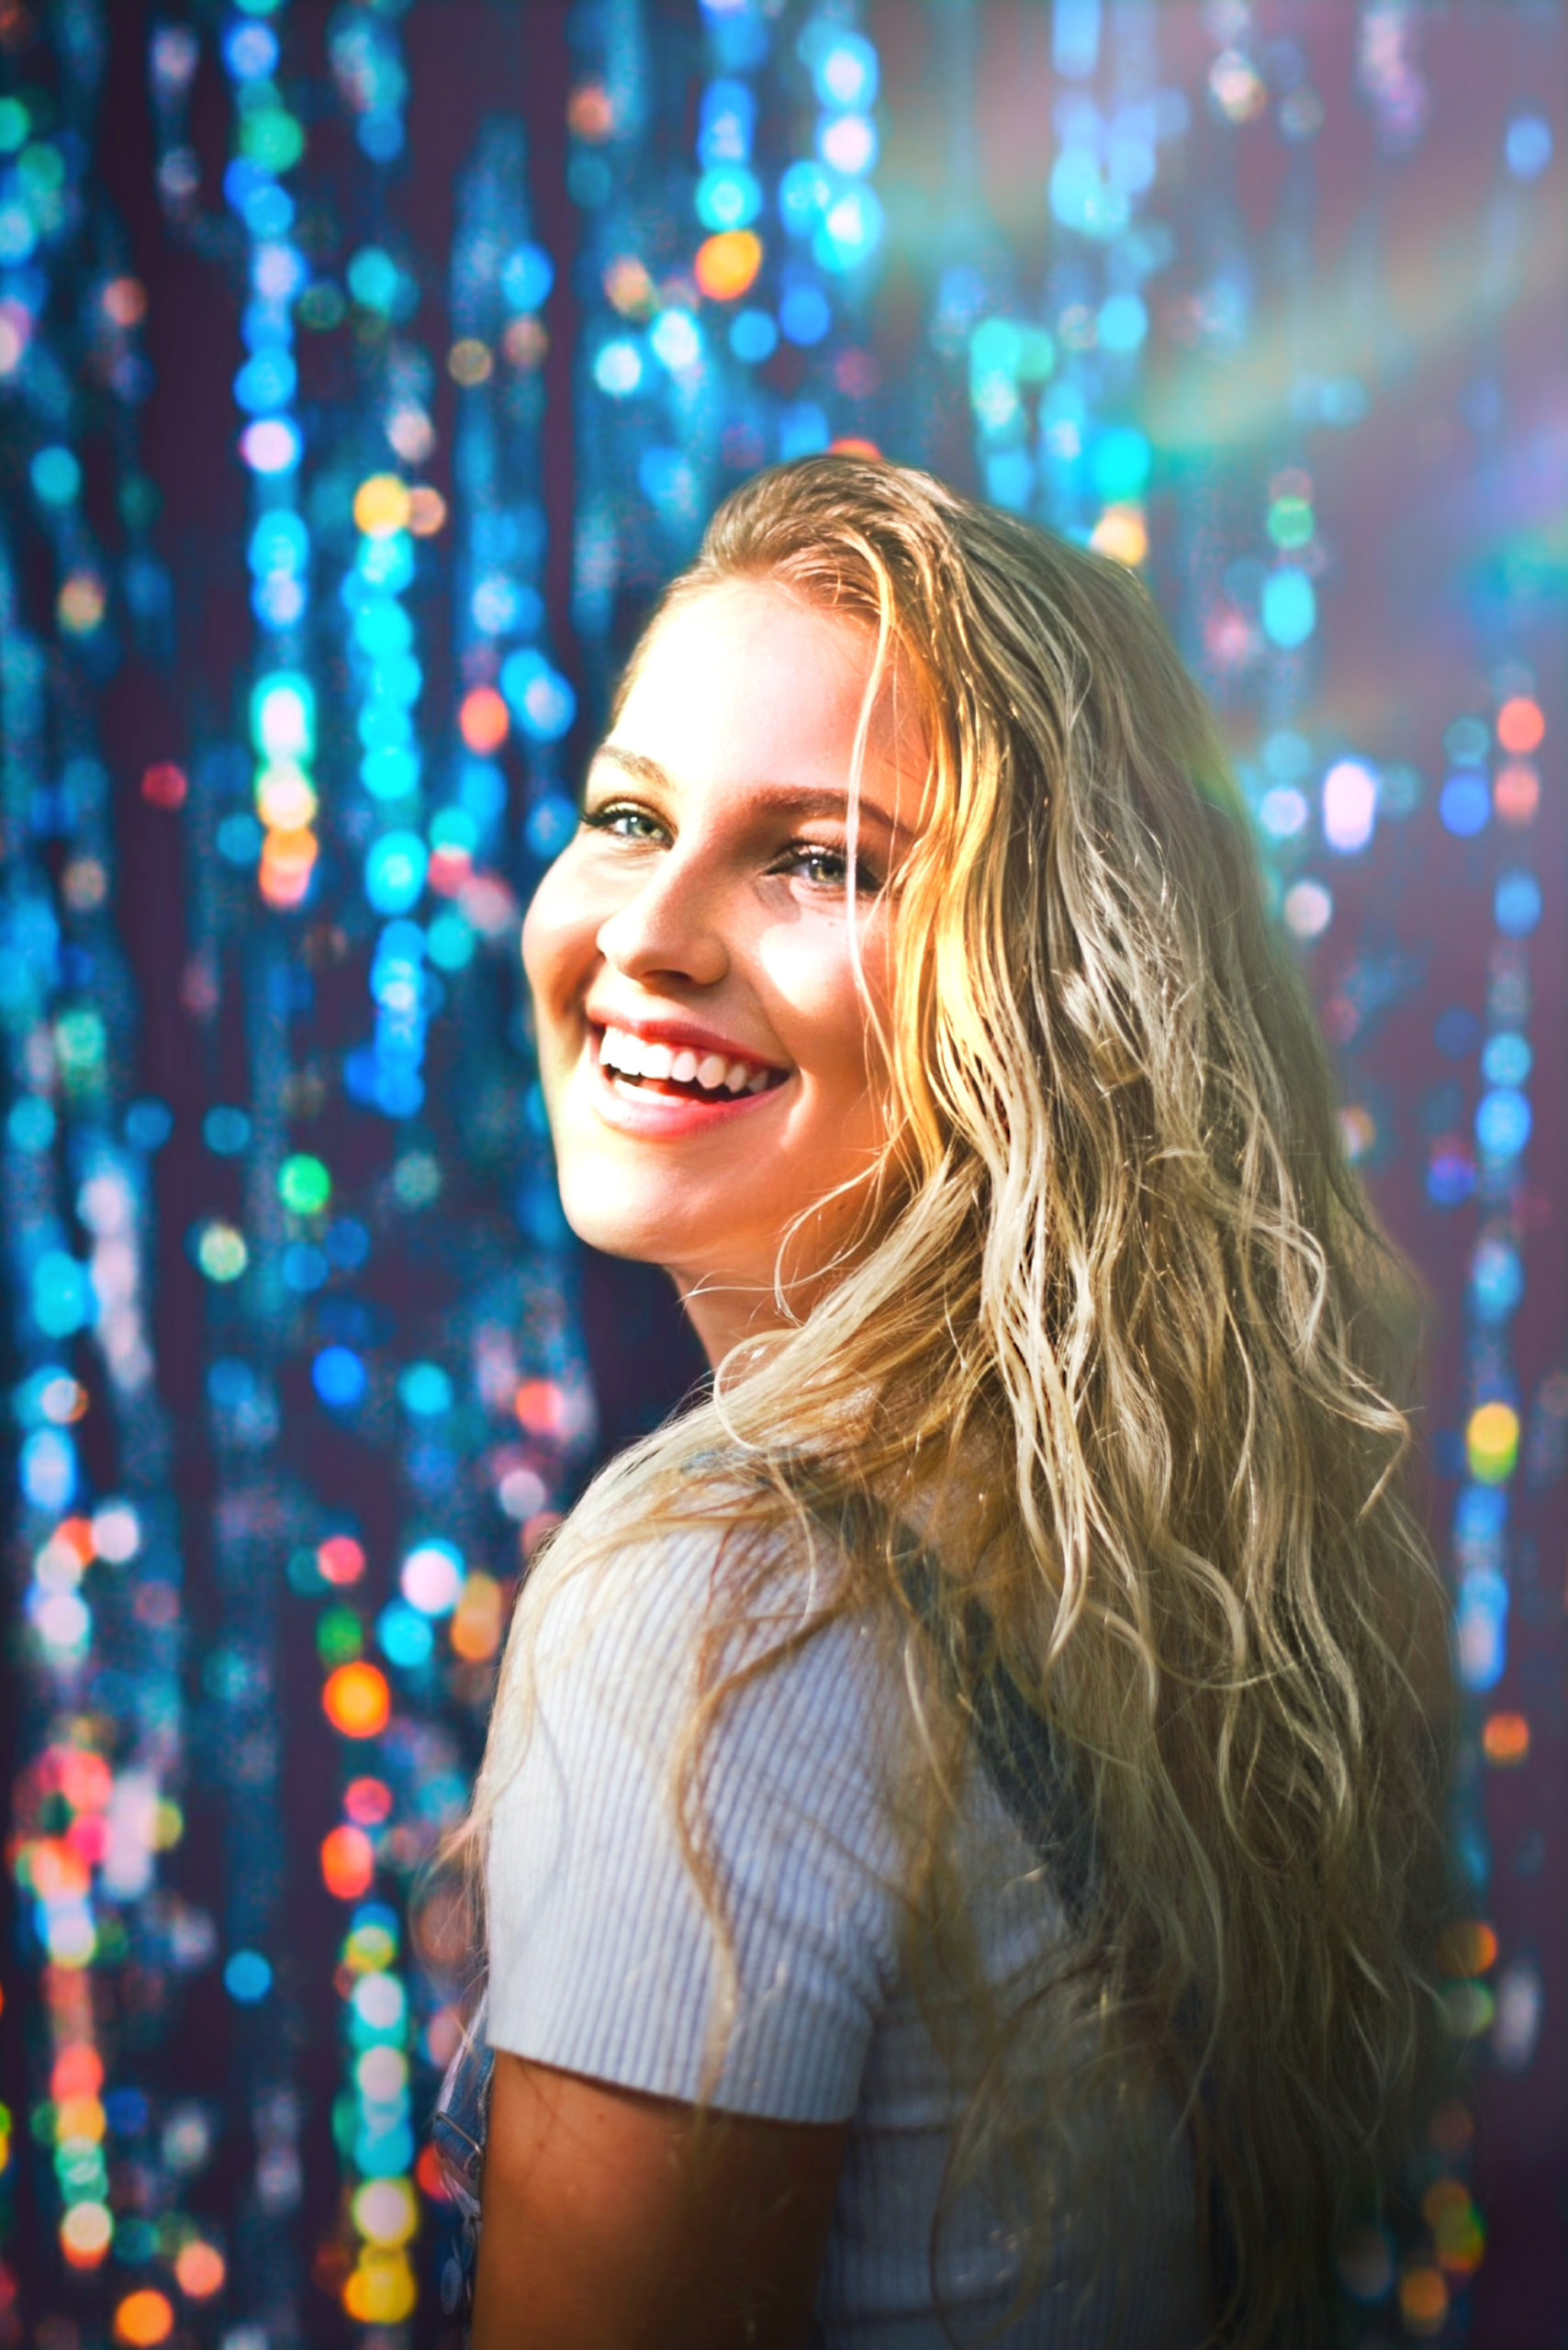 A person takes a selfie with a glittering background